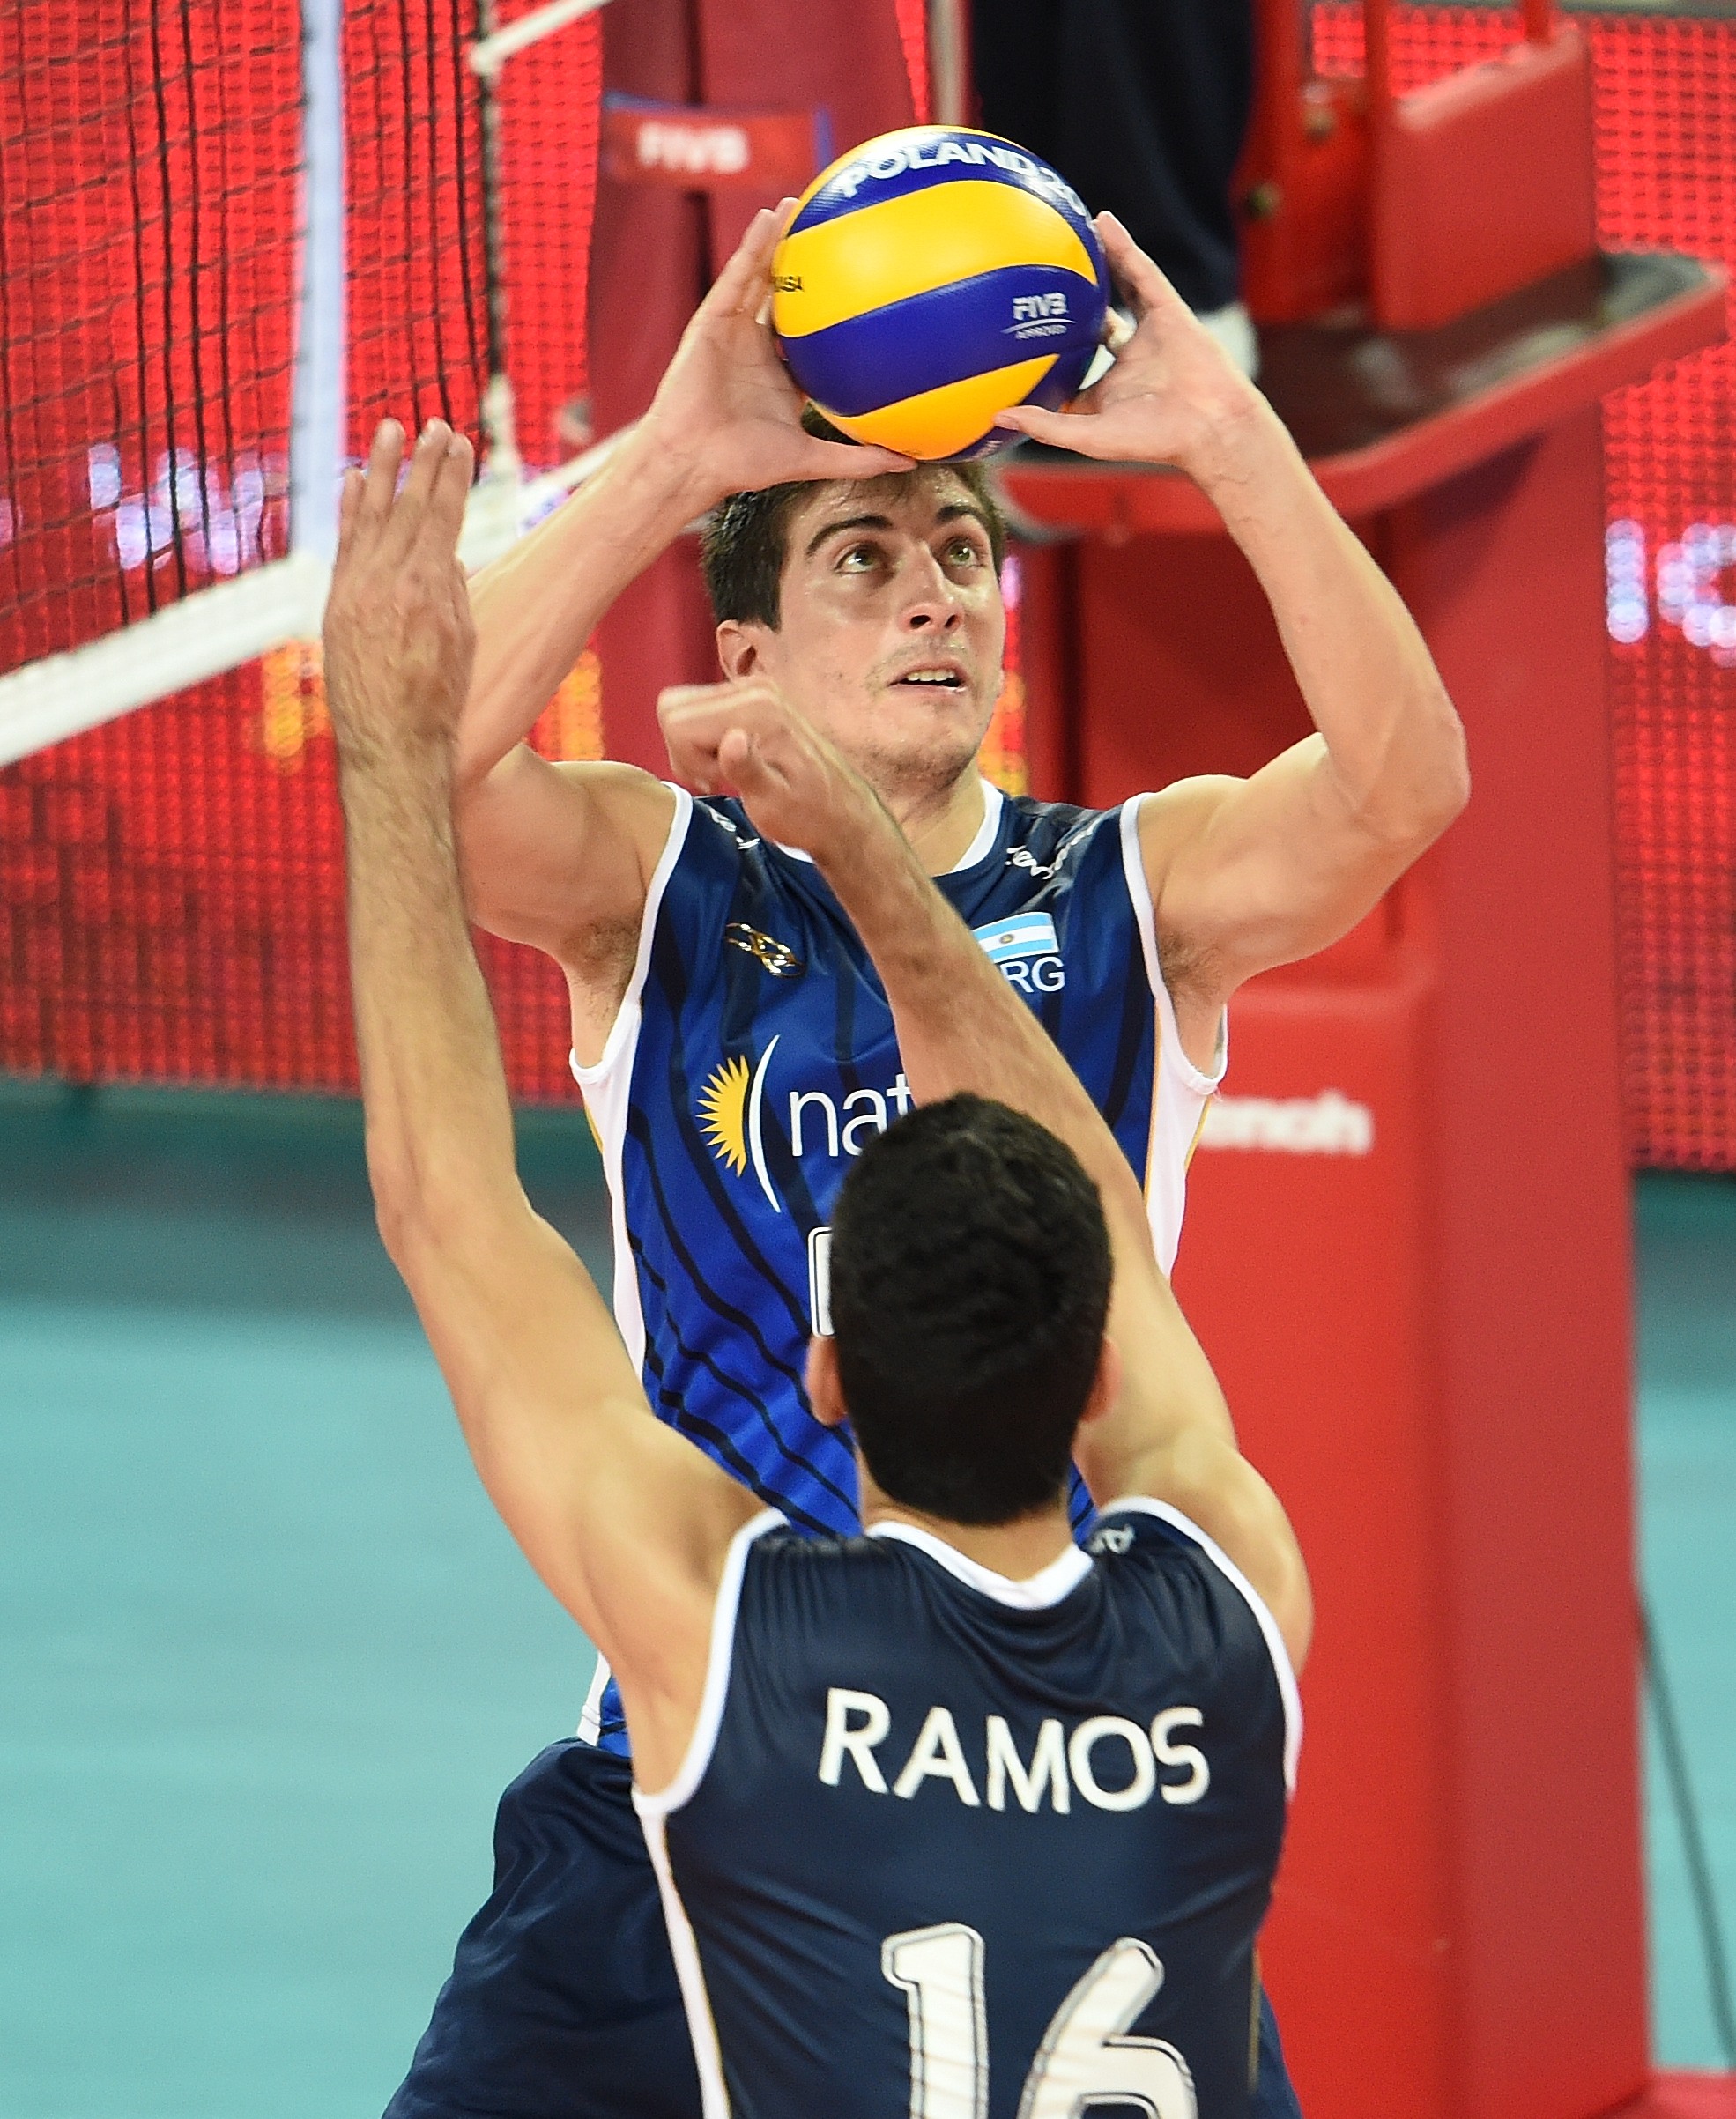 WROCLAW, POLAND - AUGUST 31: XX of Argentina spikes the ball during the FIVB World Championships match between Venezuela and Argentina on August 31, 2014 in Wroclaw, Poland. (Photo by Piotr Hawalej/Getty Images for FIVB)